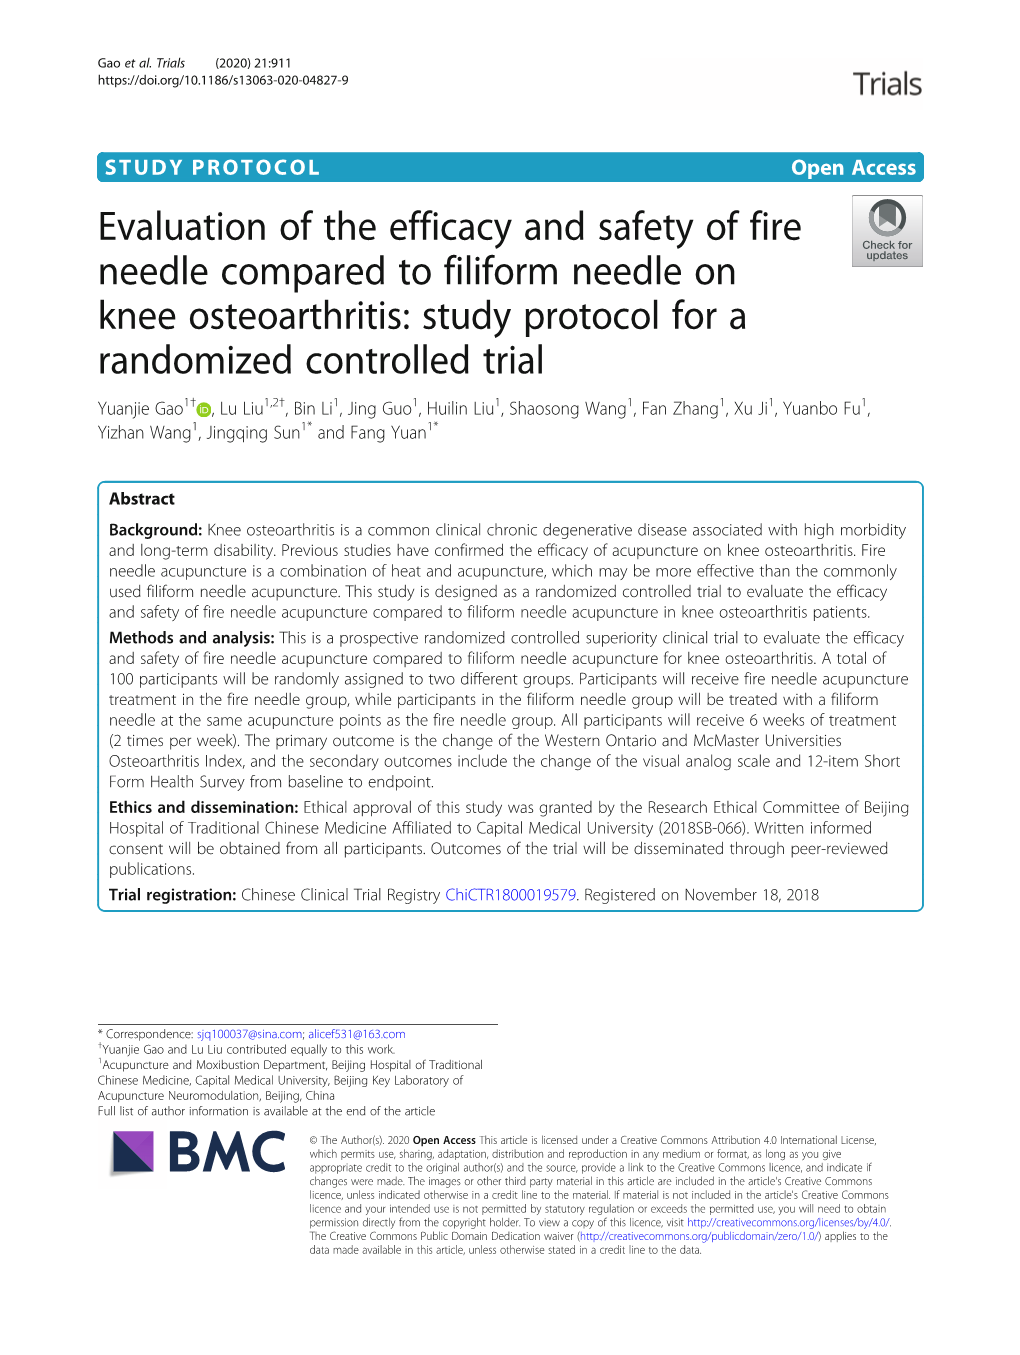 Evaluation of the Efficacy and Safety of Fire Needle